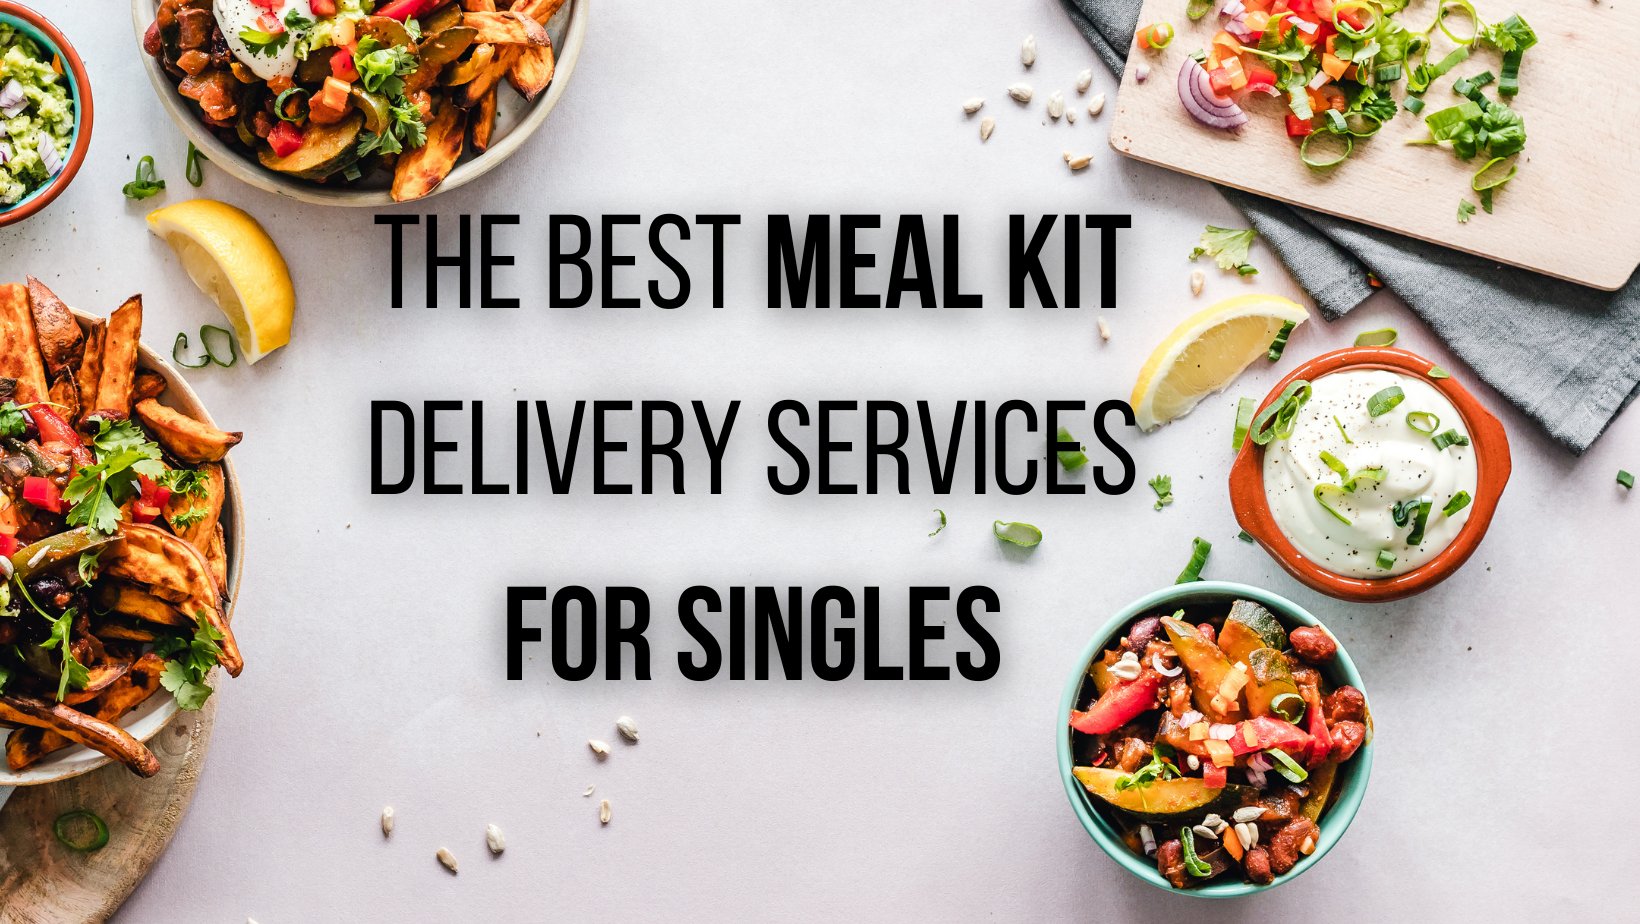 The 9 Best Meal Kits For Singles + 8 Other Meal Kits to Consider